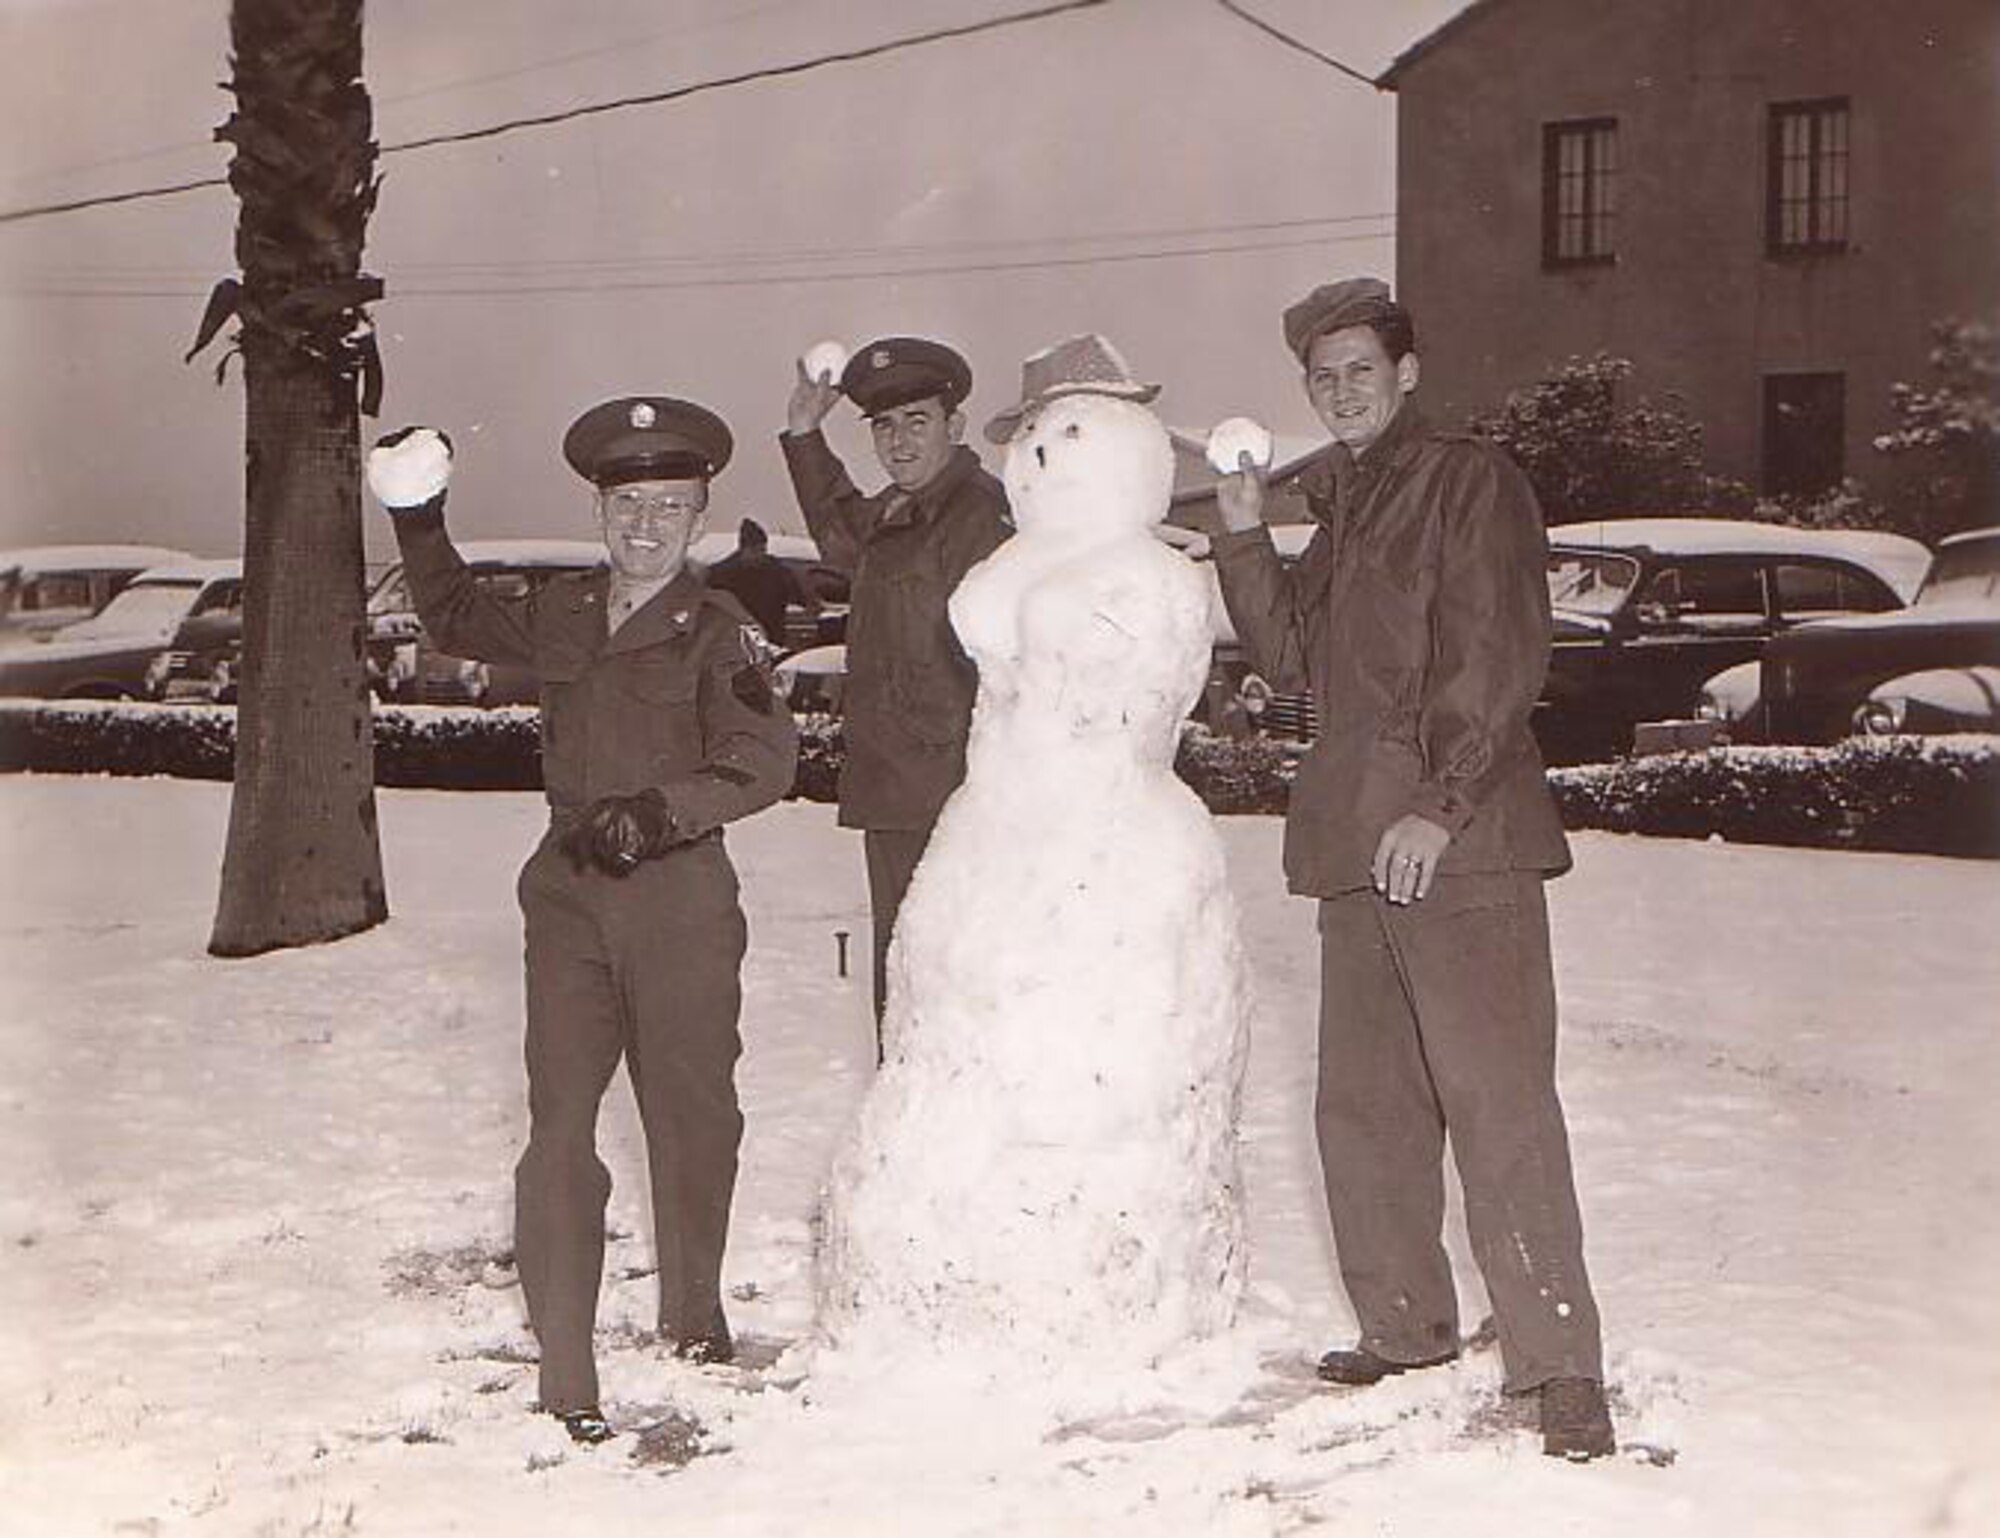 March Field - 1949
Servicemen at March Field playing in the snow after a rare snow storm in 1949. 
(Photo courtesy to U.S. Air Force)